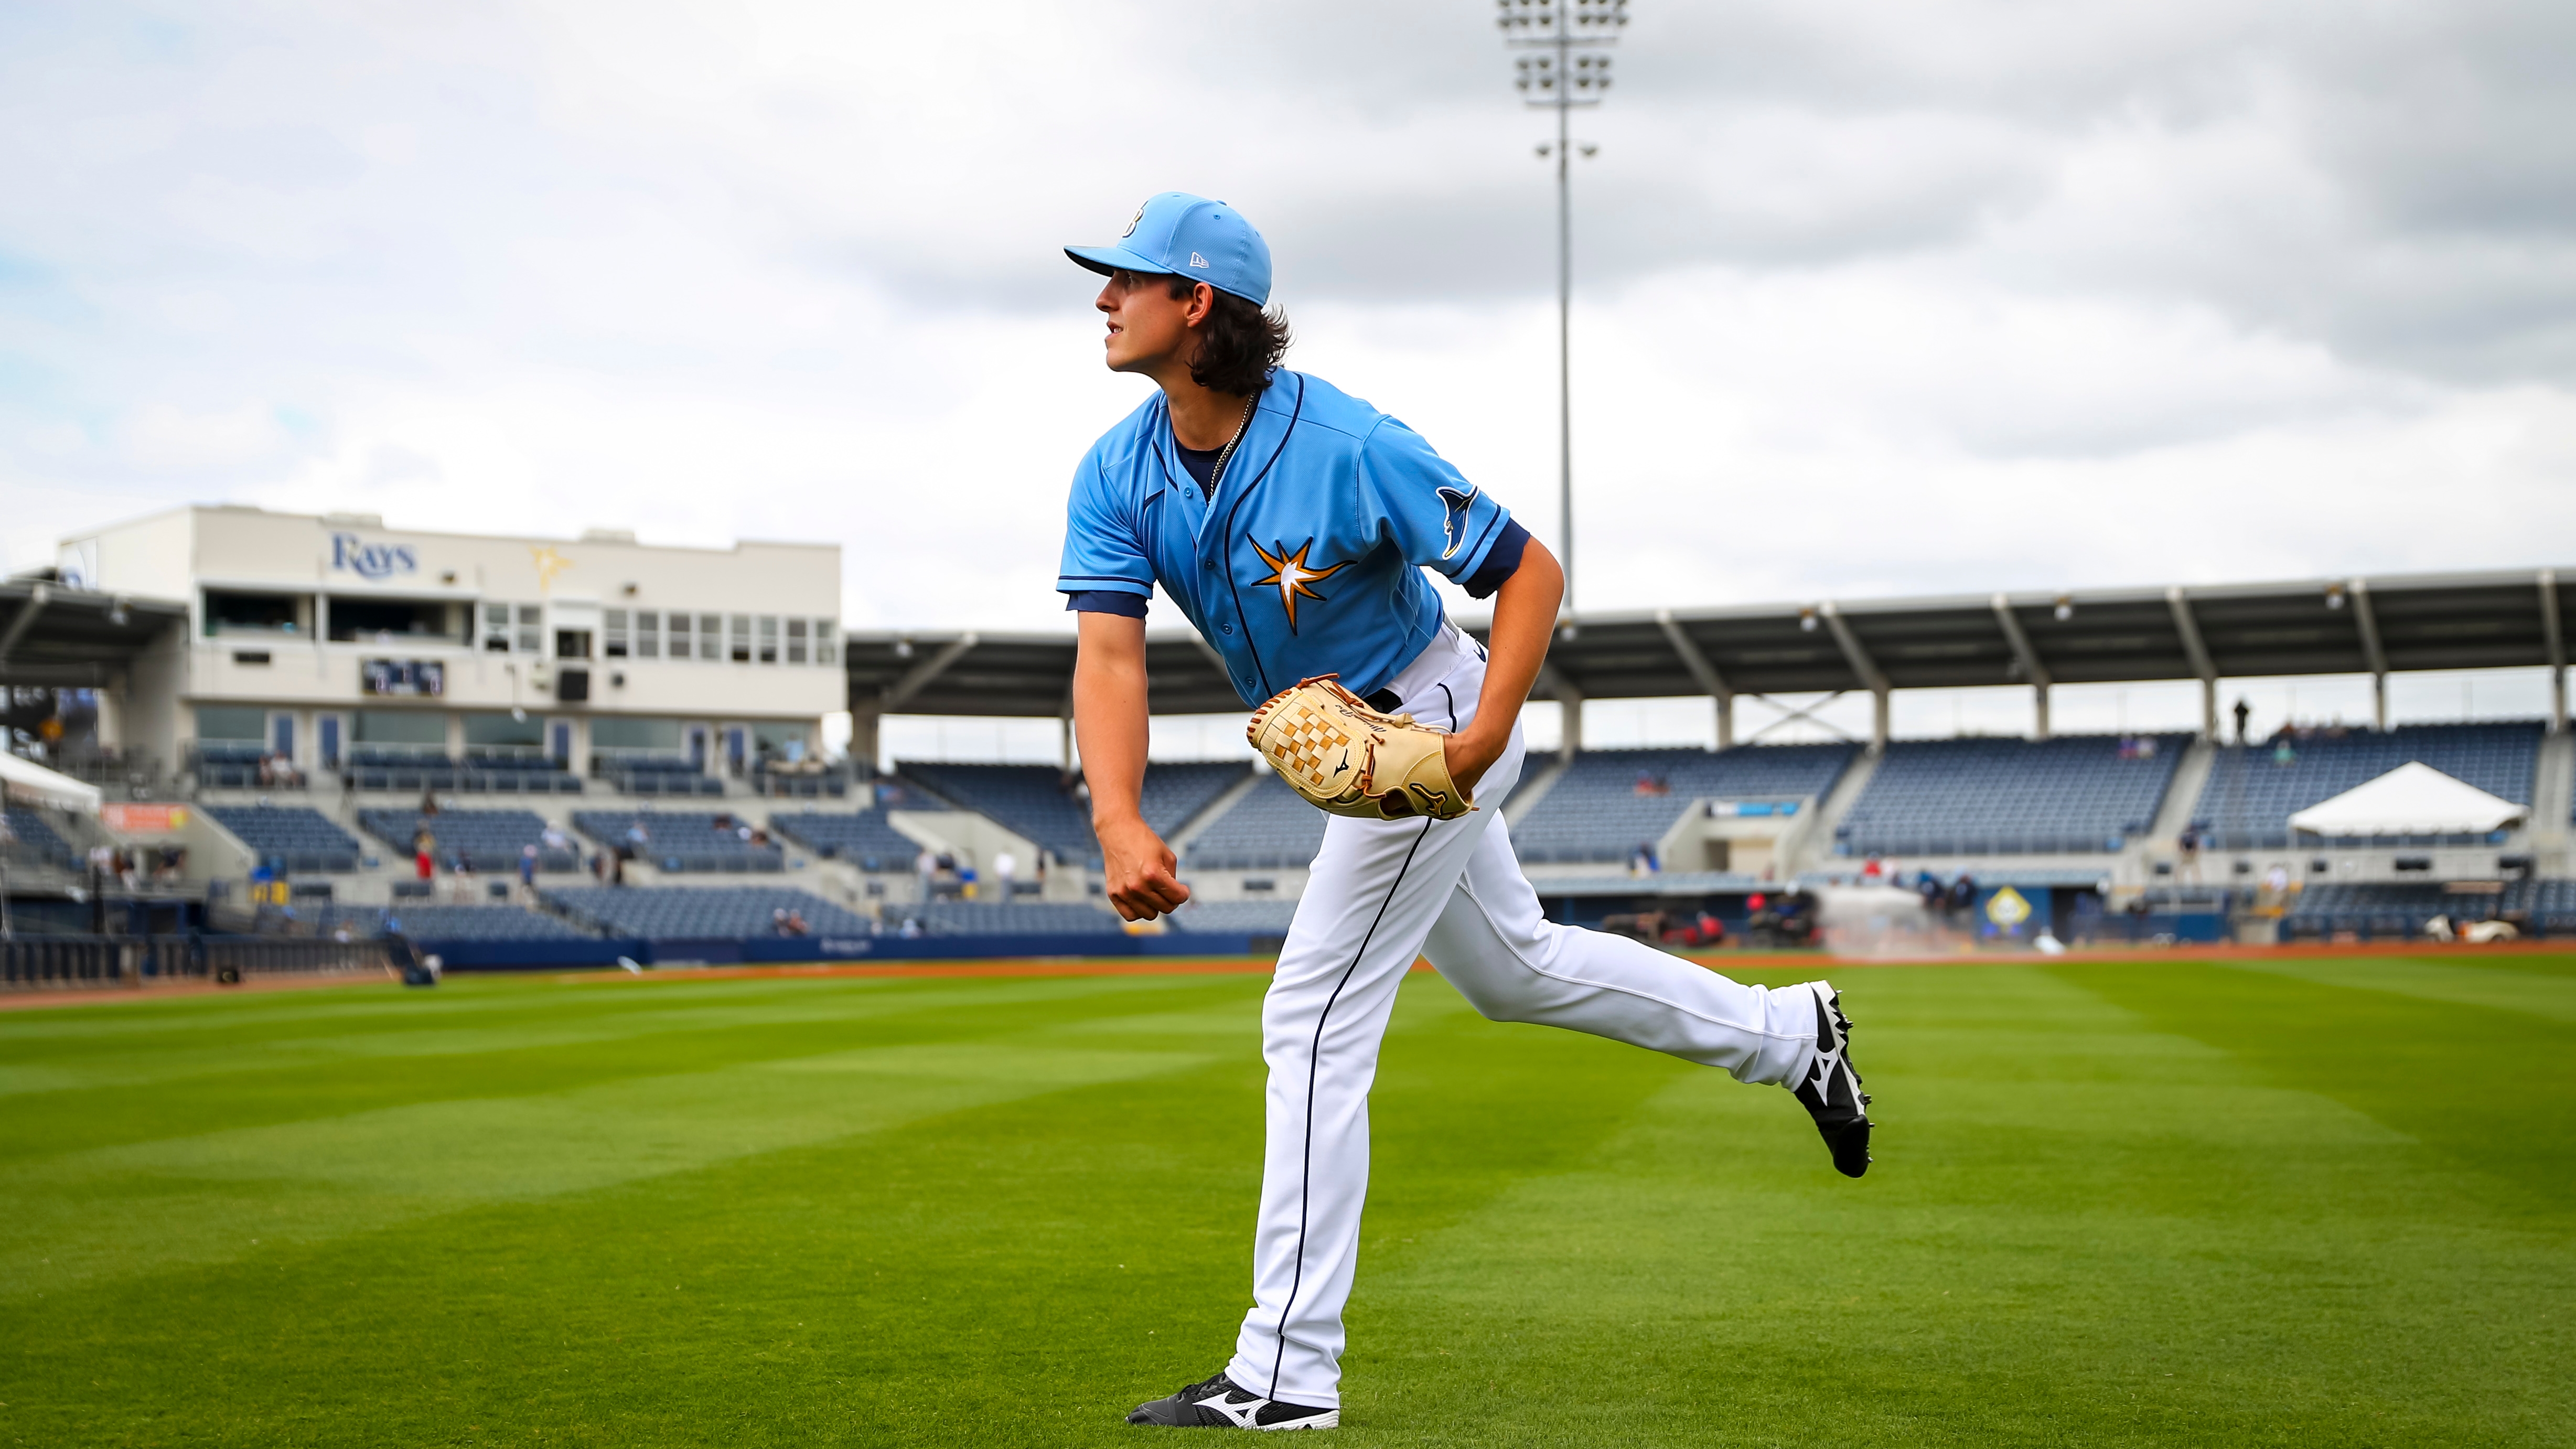 Pitchers and catchers report to Rays spring training